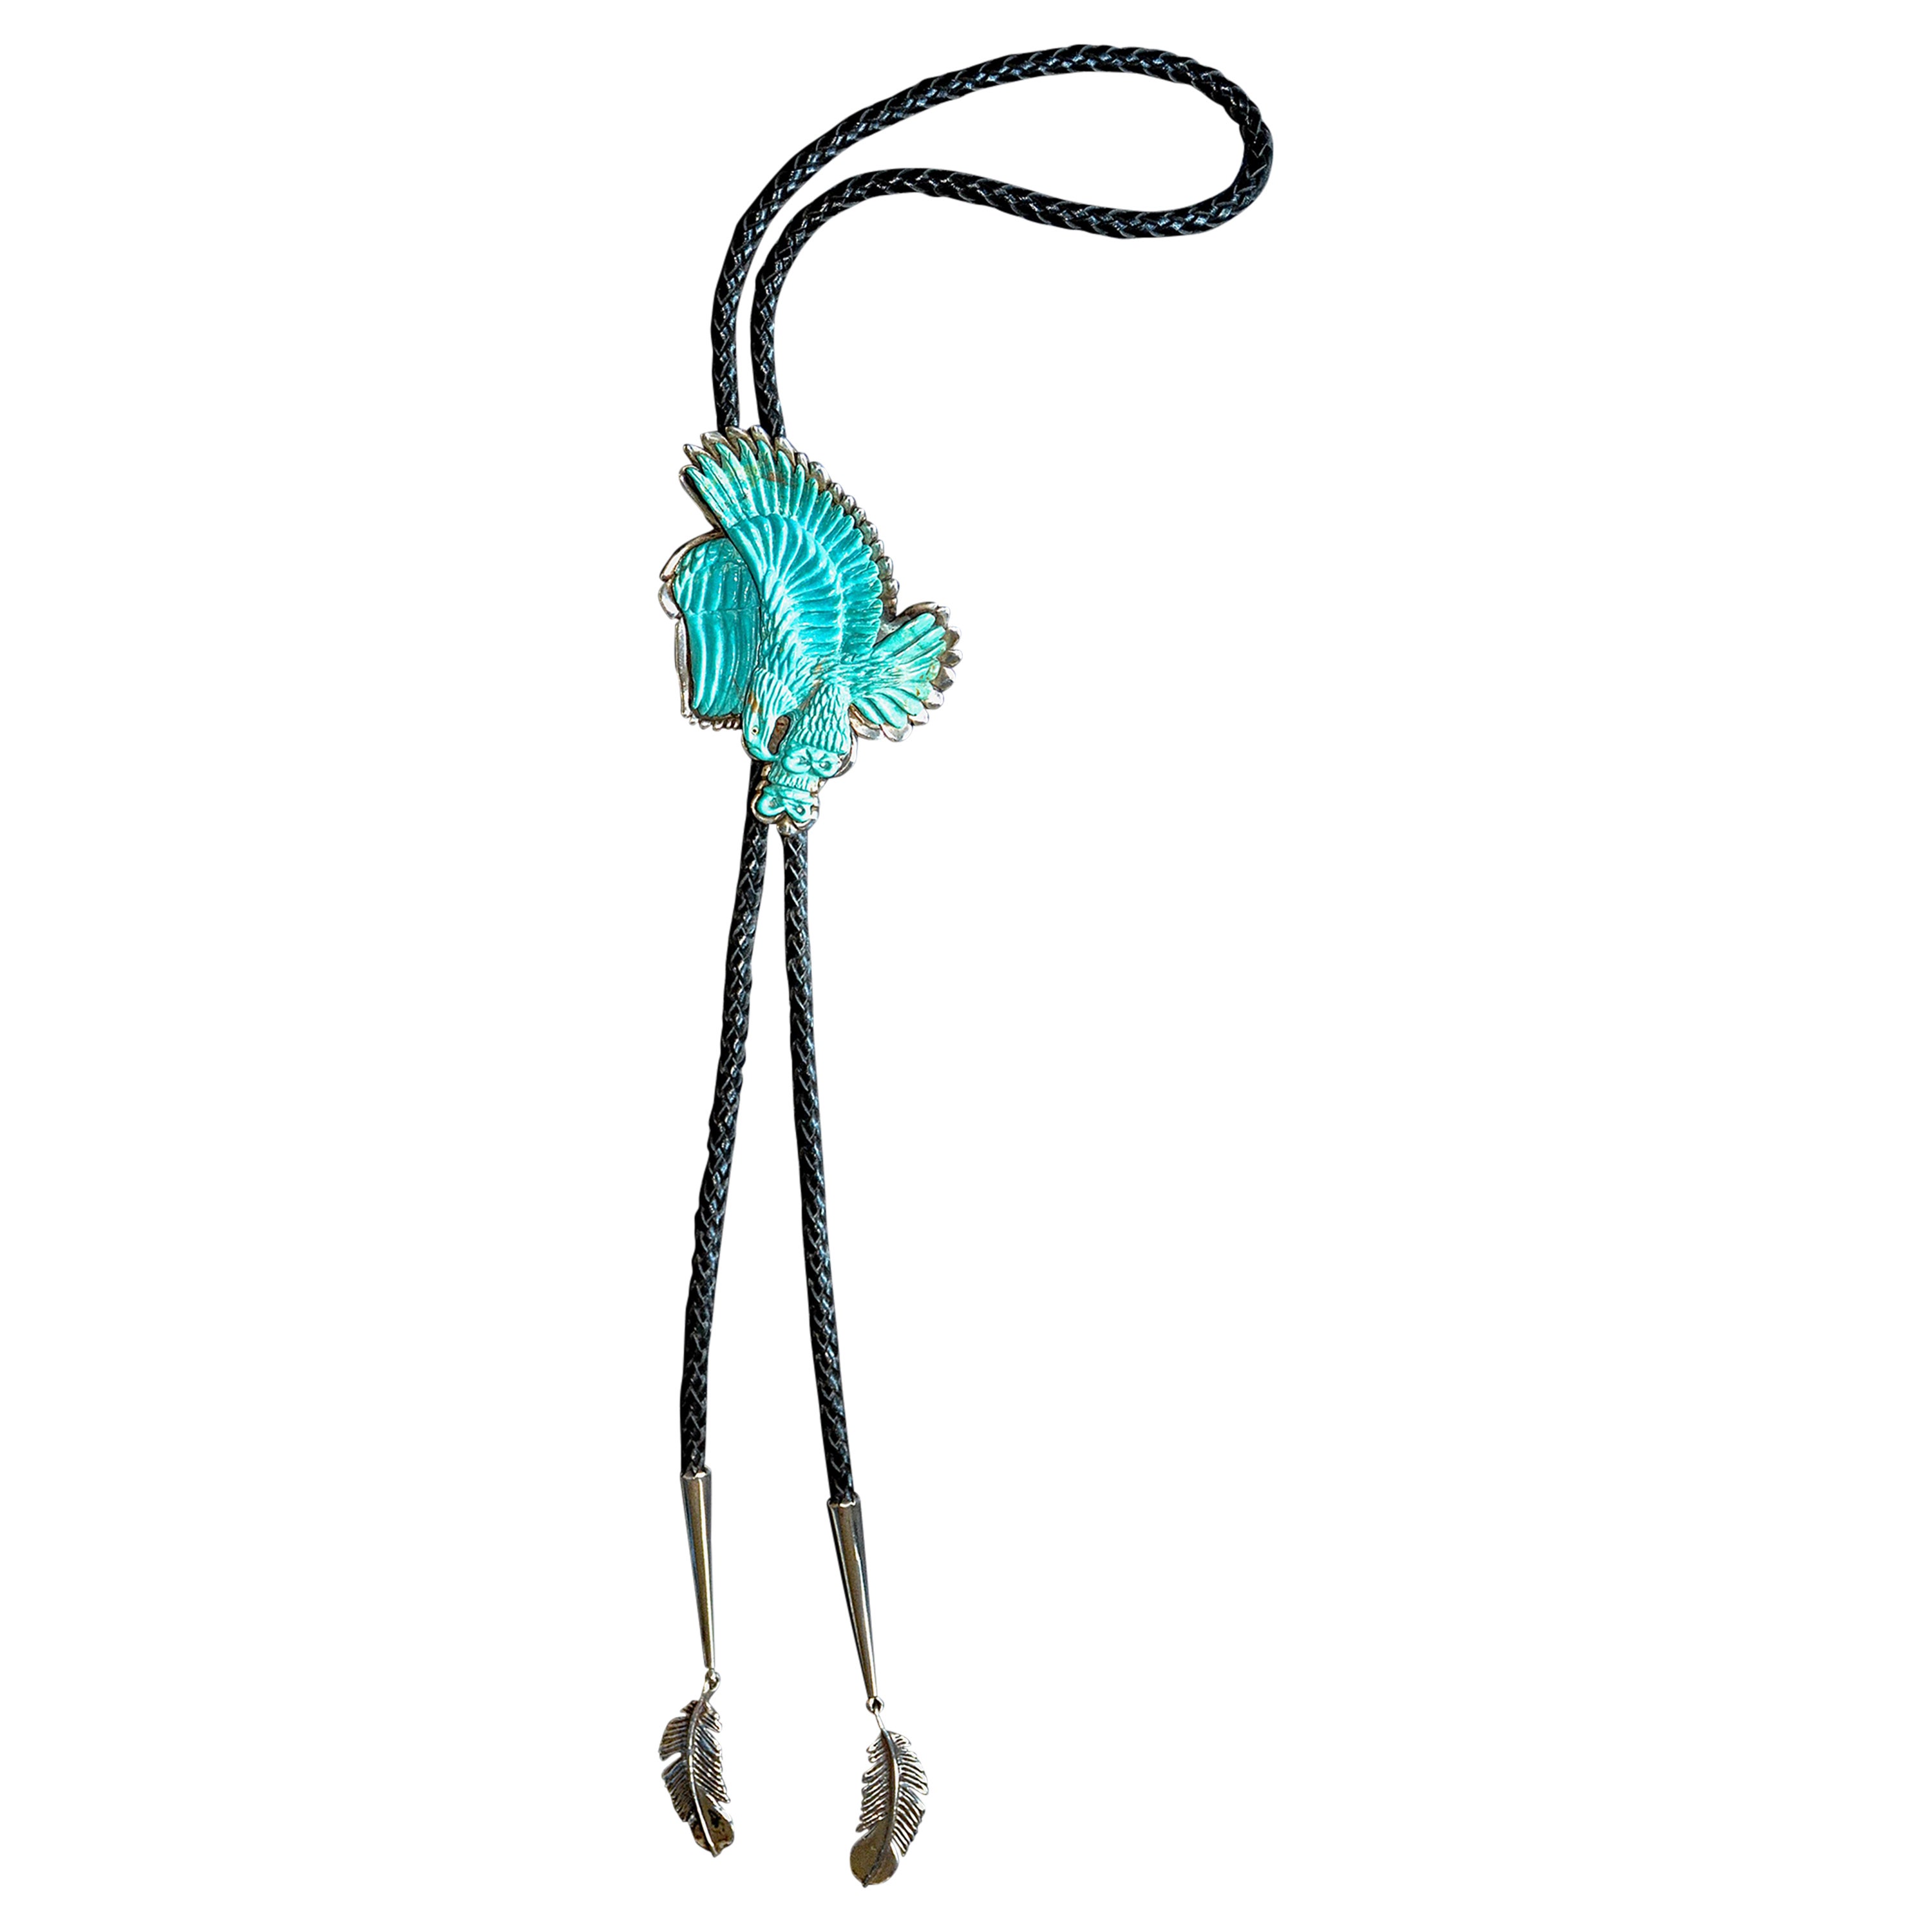 A unique carved Kingman-Mine Turquoise Eagle and Sterling Silver Bolo Tie by John Winston.

An exquisitely and richly relief-carved 380 carat turquoise eagle in flight is set in 6 ounces of sterling silver. It has an adjustable black braided-leather